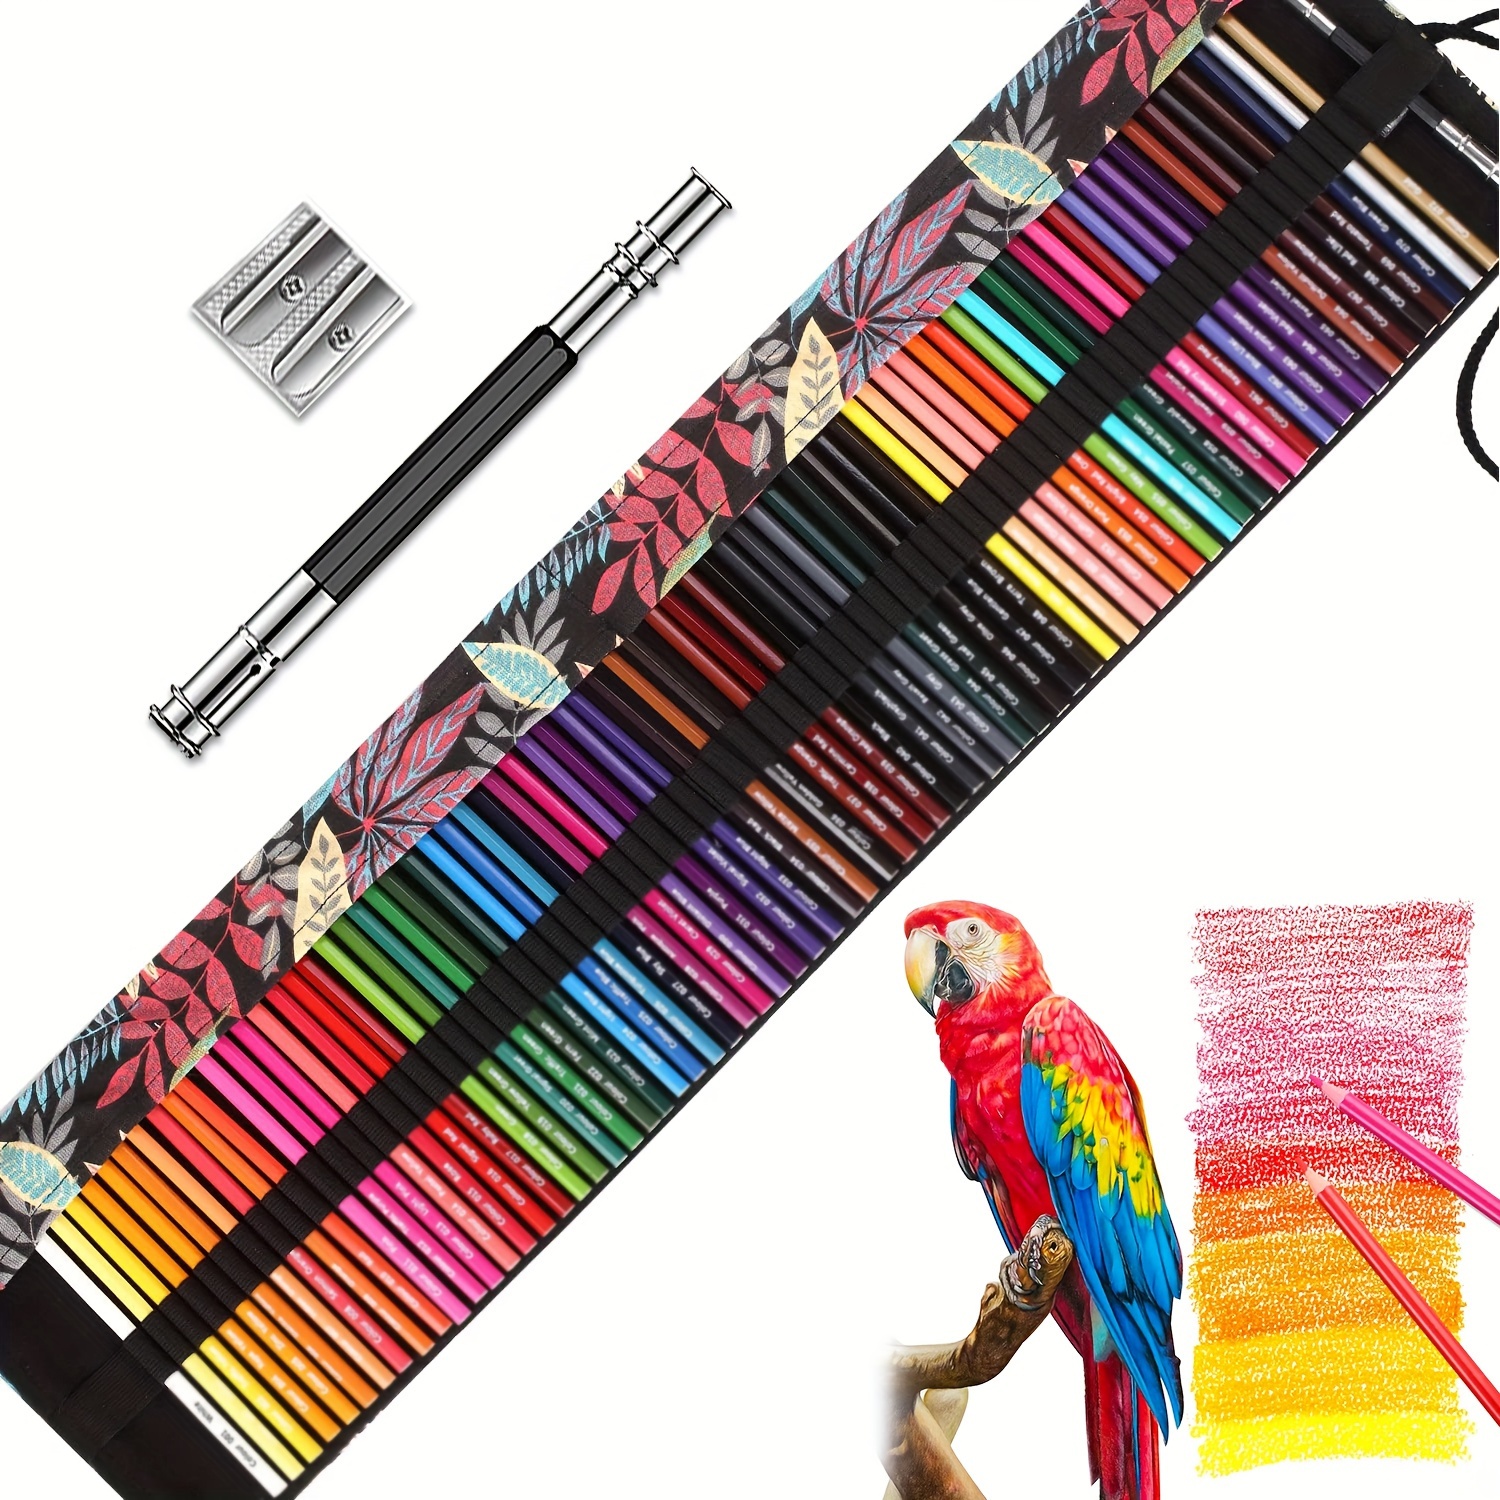 

Aipende 75pcs Colored Pencils For Adult Coloring, Soft Core, With Canvas Wrap Extra Accessories, Artist Sketching Drawing Pencils Art Craft Supplies, Coloring Pencils Set Gift For Adults Beginners